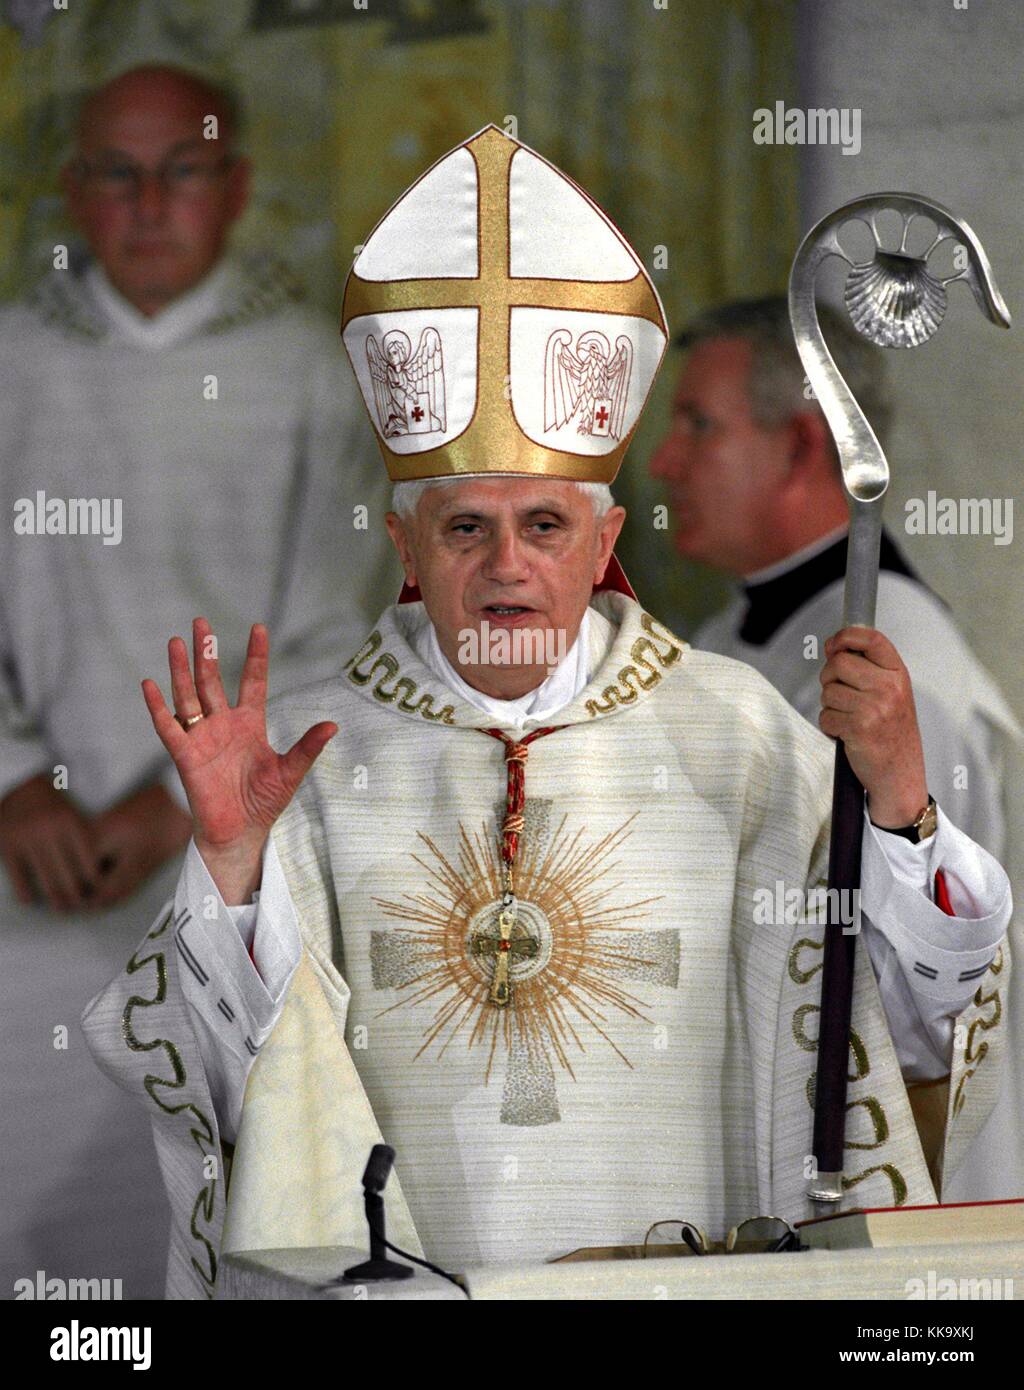 Cardinal Joseph Ratzinger celebrating the Mass in the local church in St. Oswald, pictured on 13th July 1997, Marktl am Inn, Upper Bavaria. He was born there on 16th April 1927 and was appointed of late to honorary citizen. | usage worldwide Stock Photo